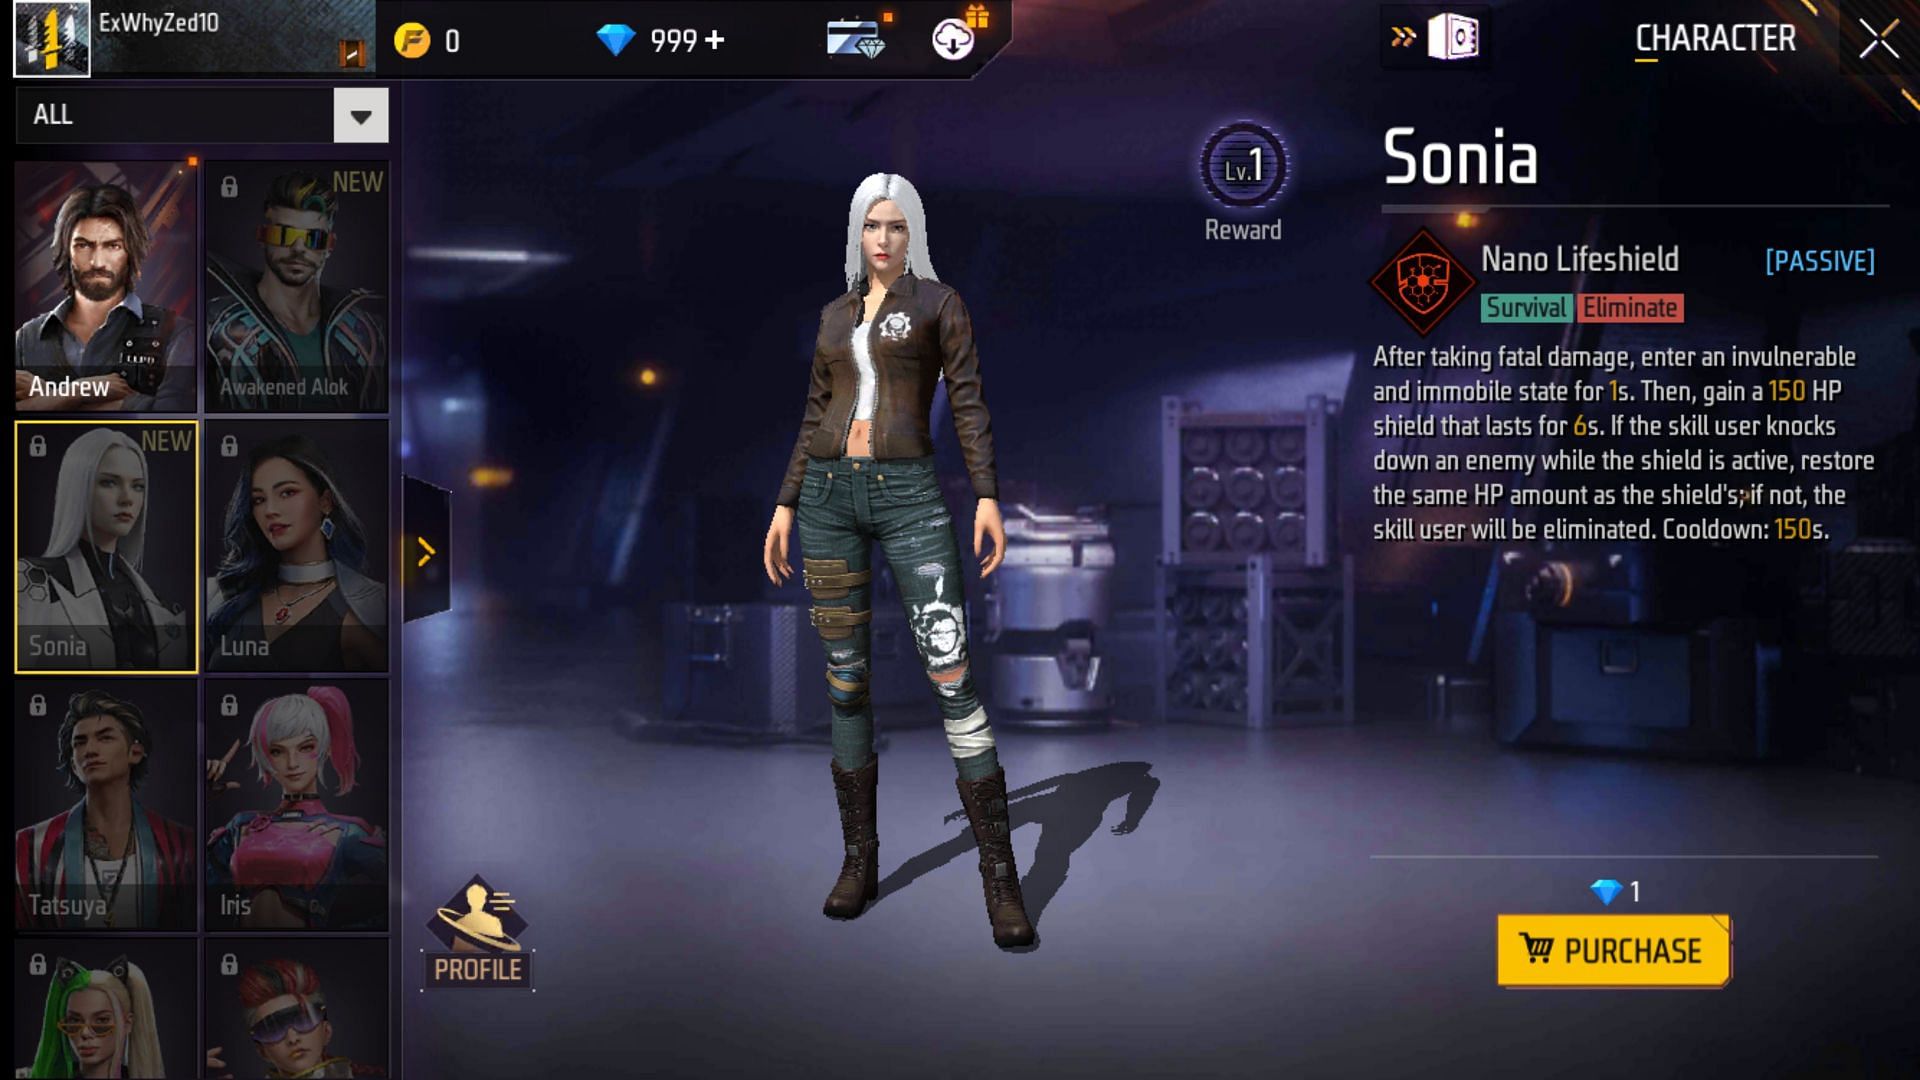 Free Fire Advance Server Live - New Character, New System, New